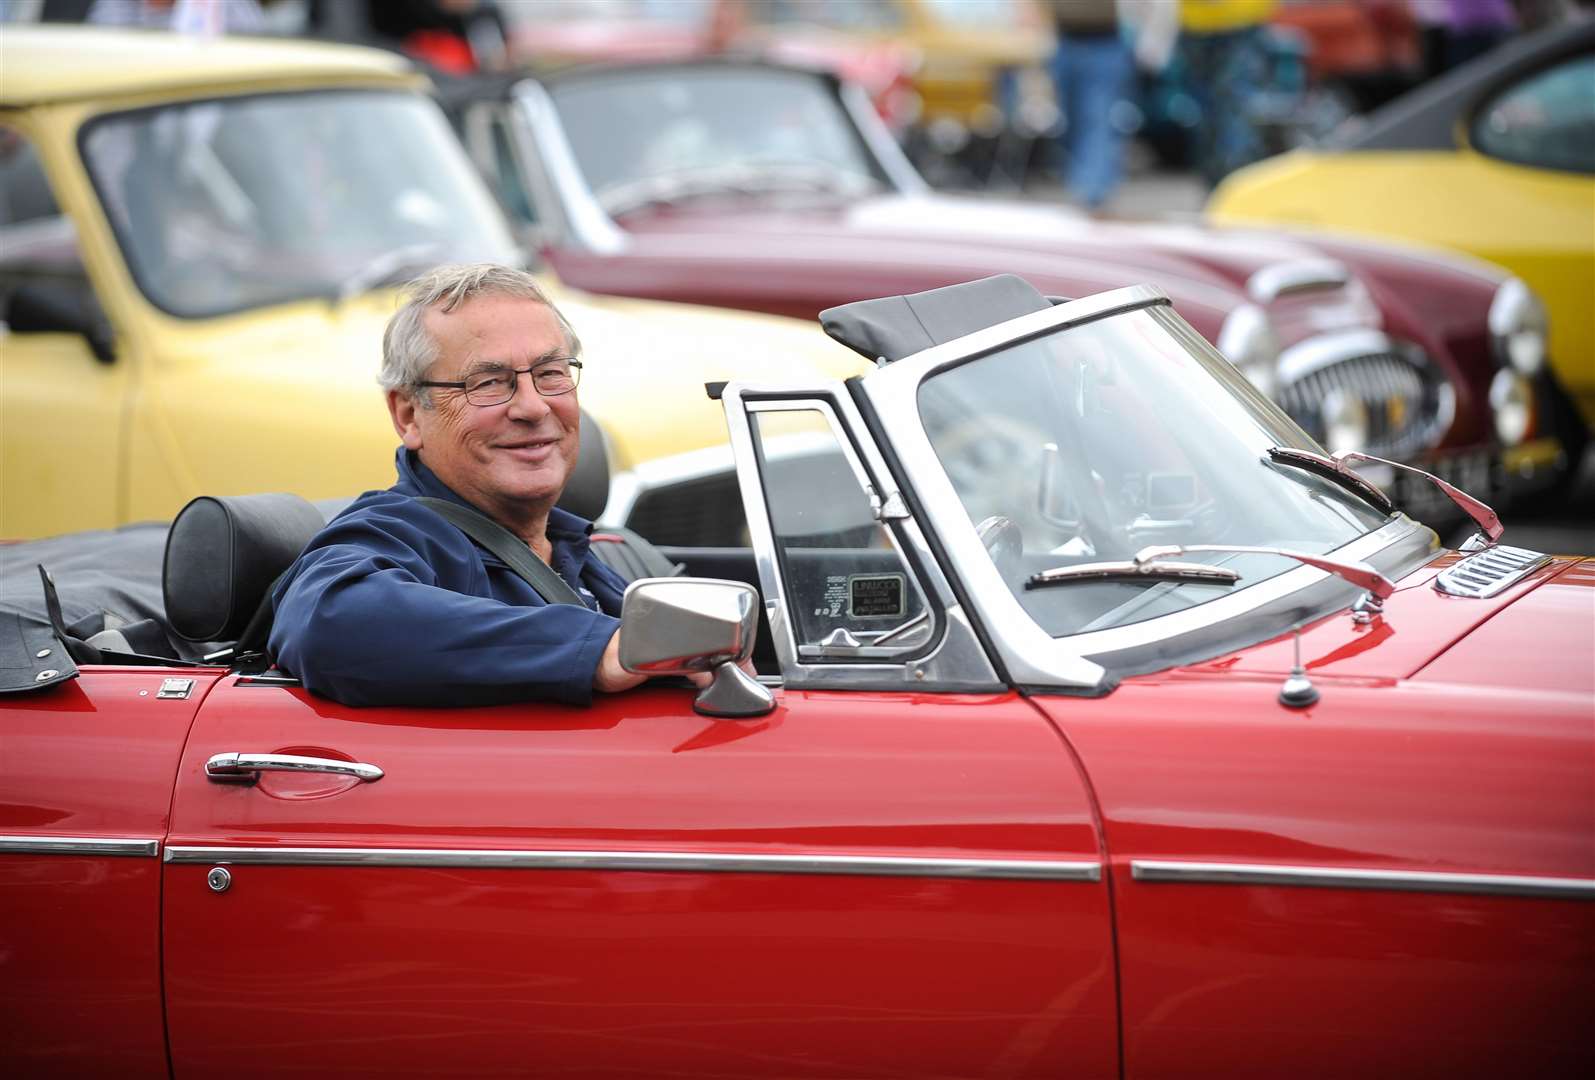 Nick Daubney at the Classic Car Rally on the Tuesday Market Place in King's Lynn in 2019